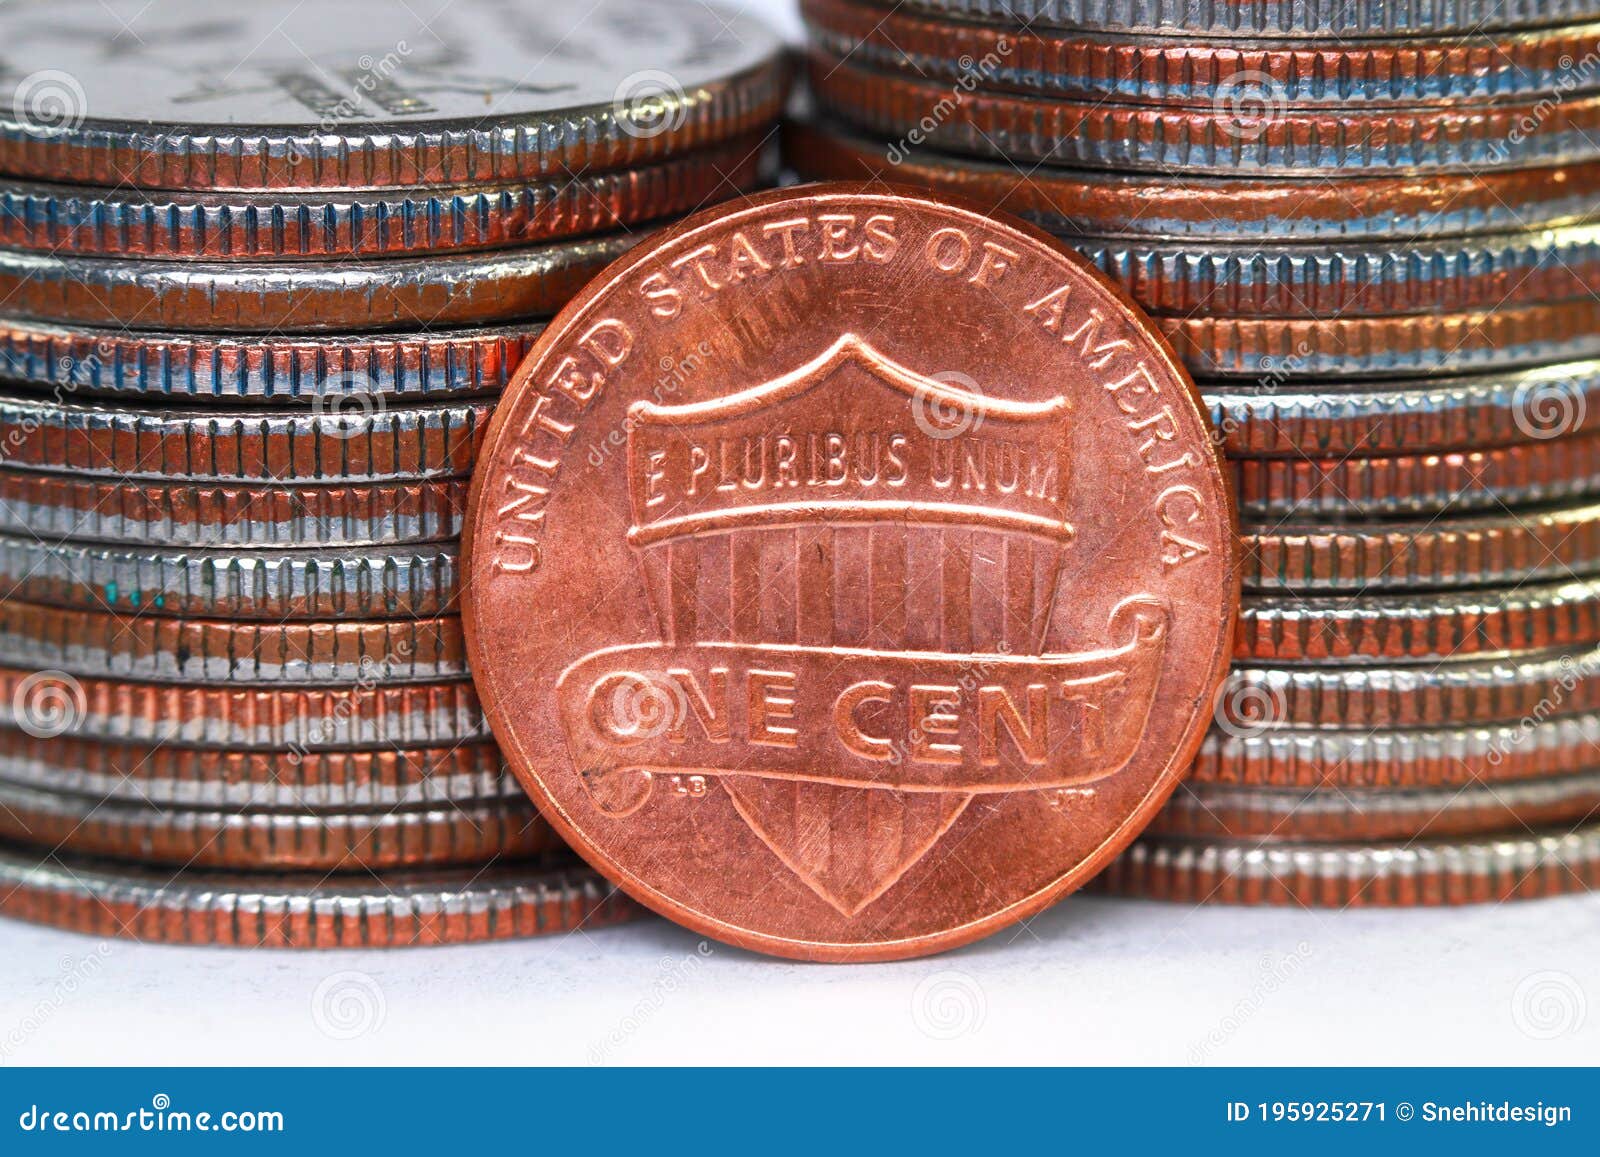 american one cent coin against quarter coins